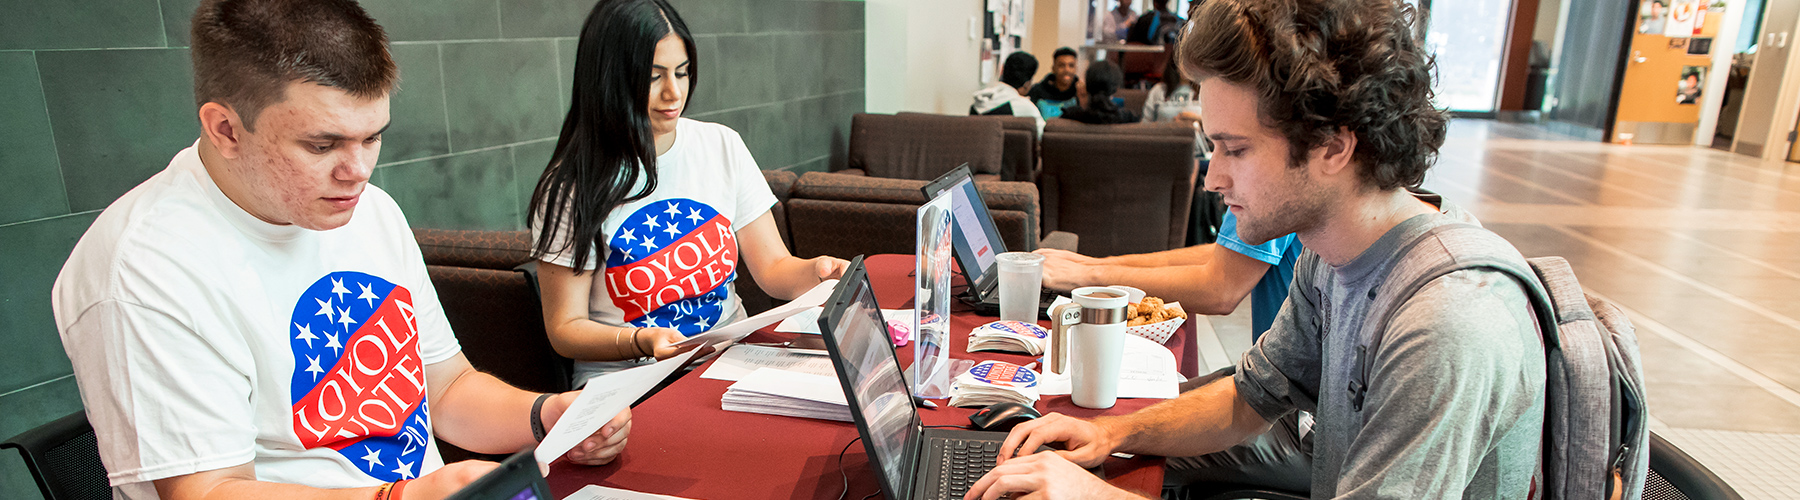 Loyola is hosting several events for students, faculty, and staff to vote and stay informed